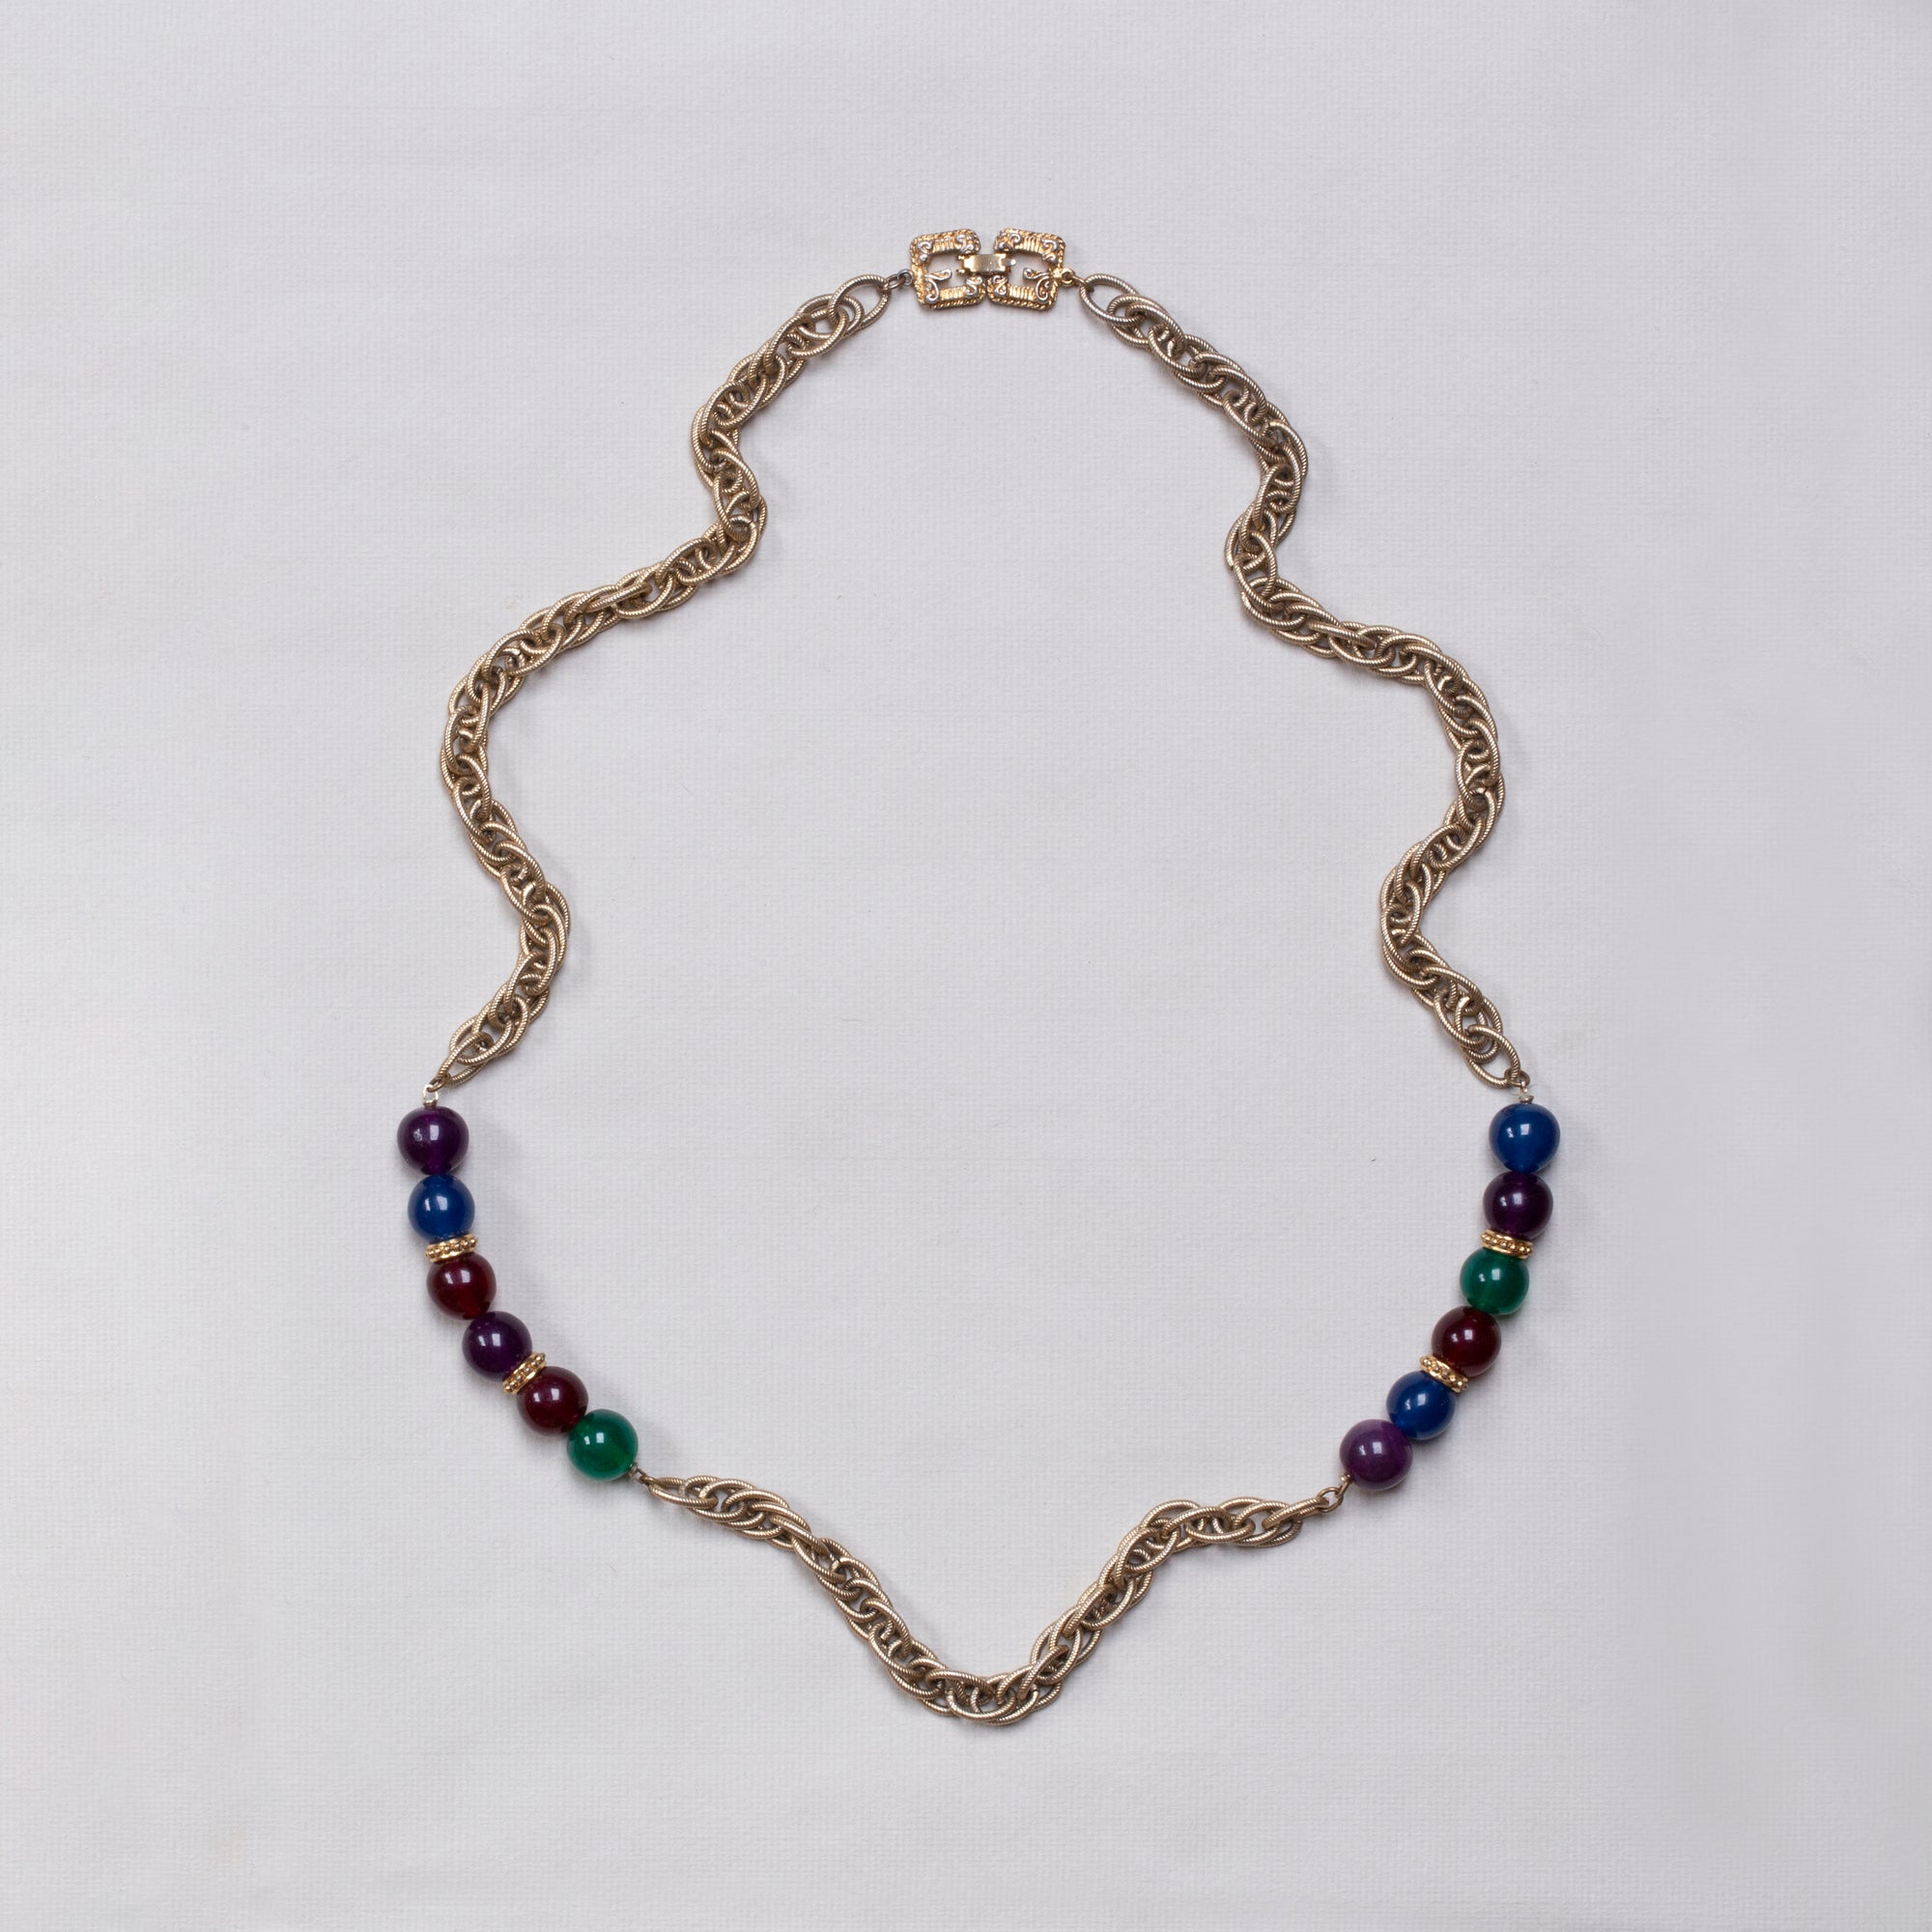 Vintage Gold Chain Beads Necklace